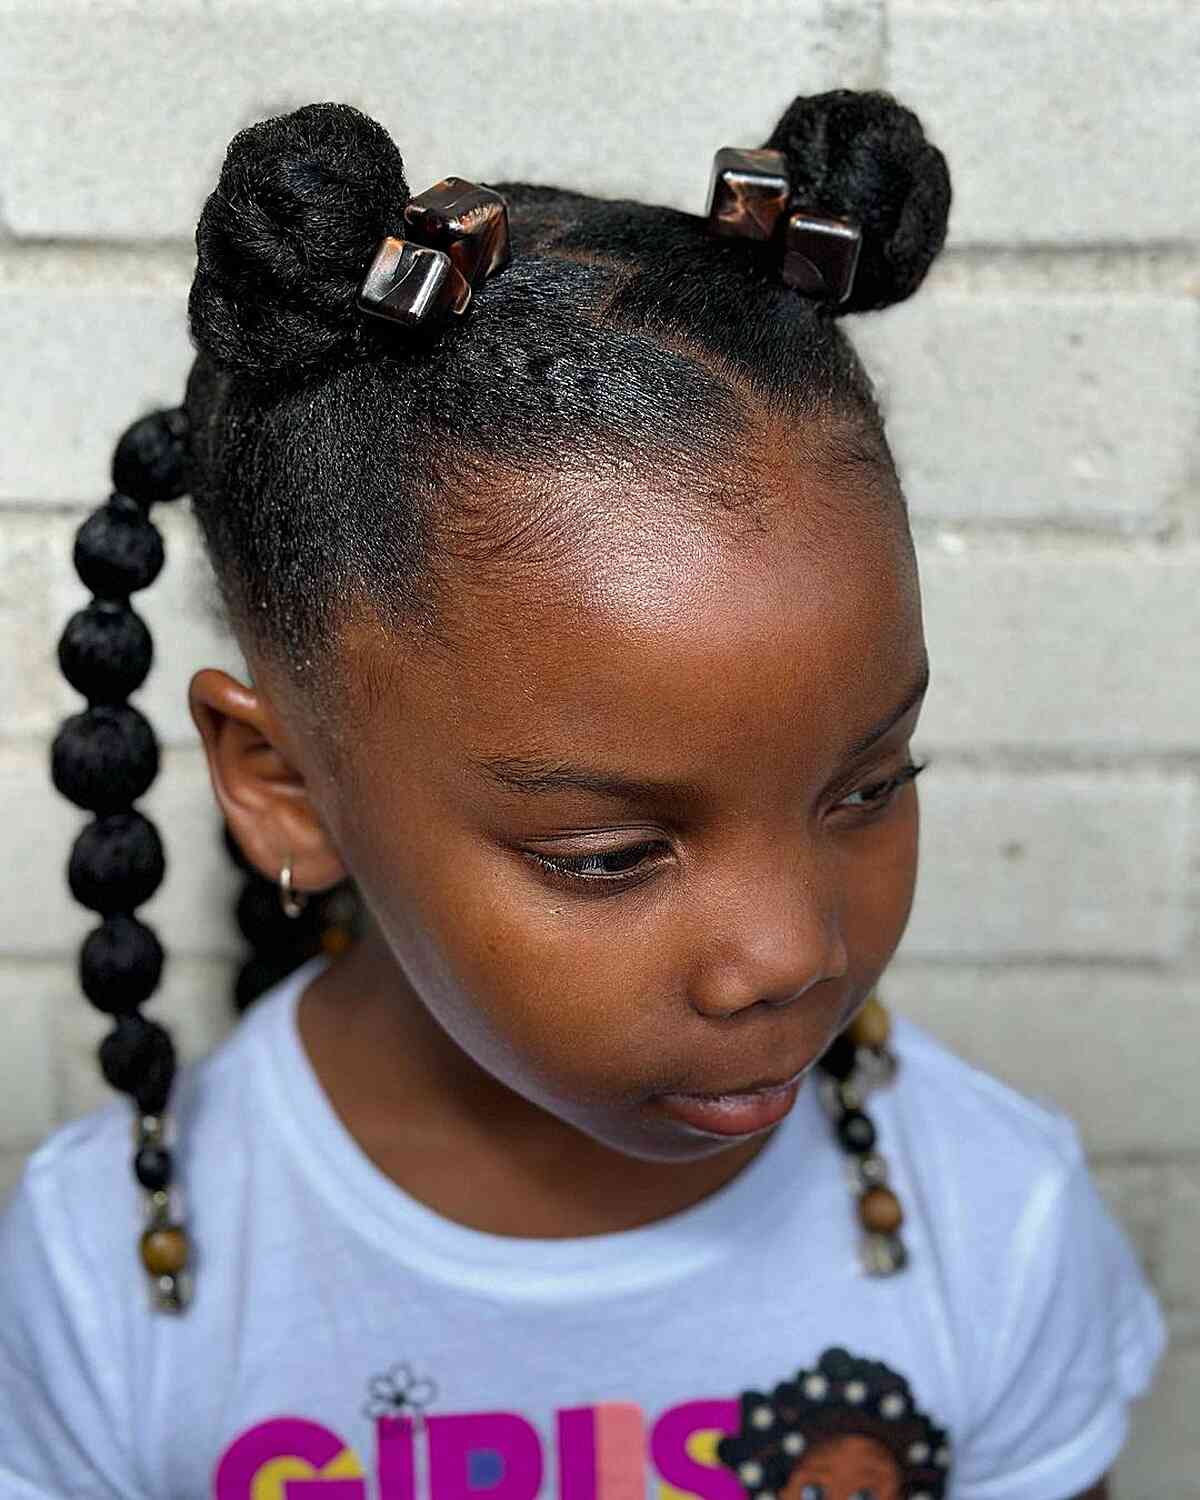 Hairstyles For Little Girls With Curly Hair | Protect the People